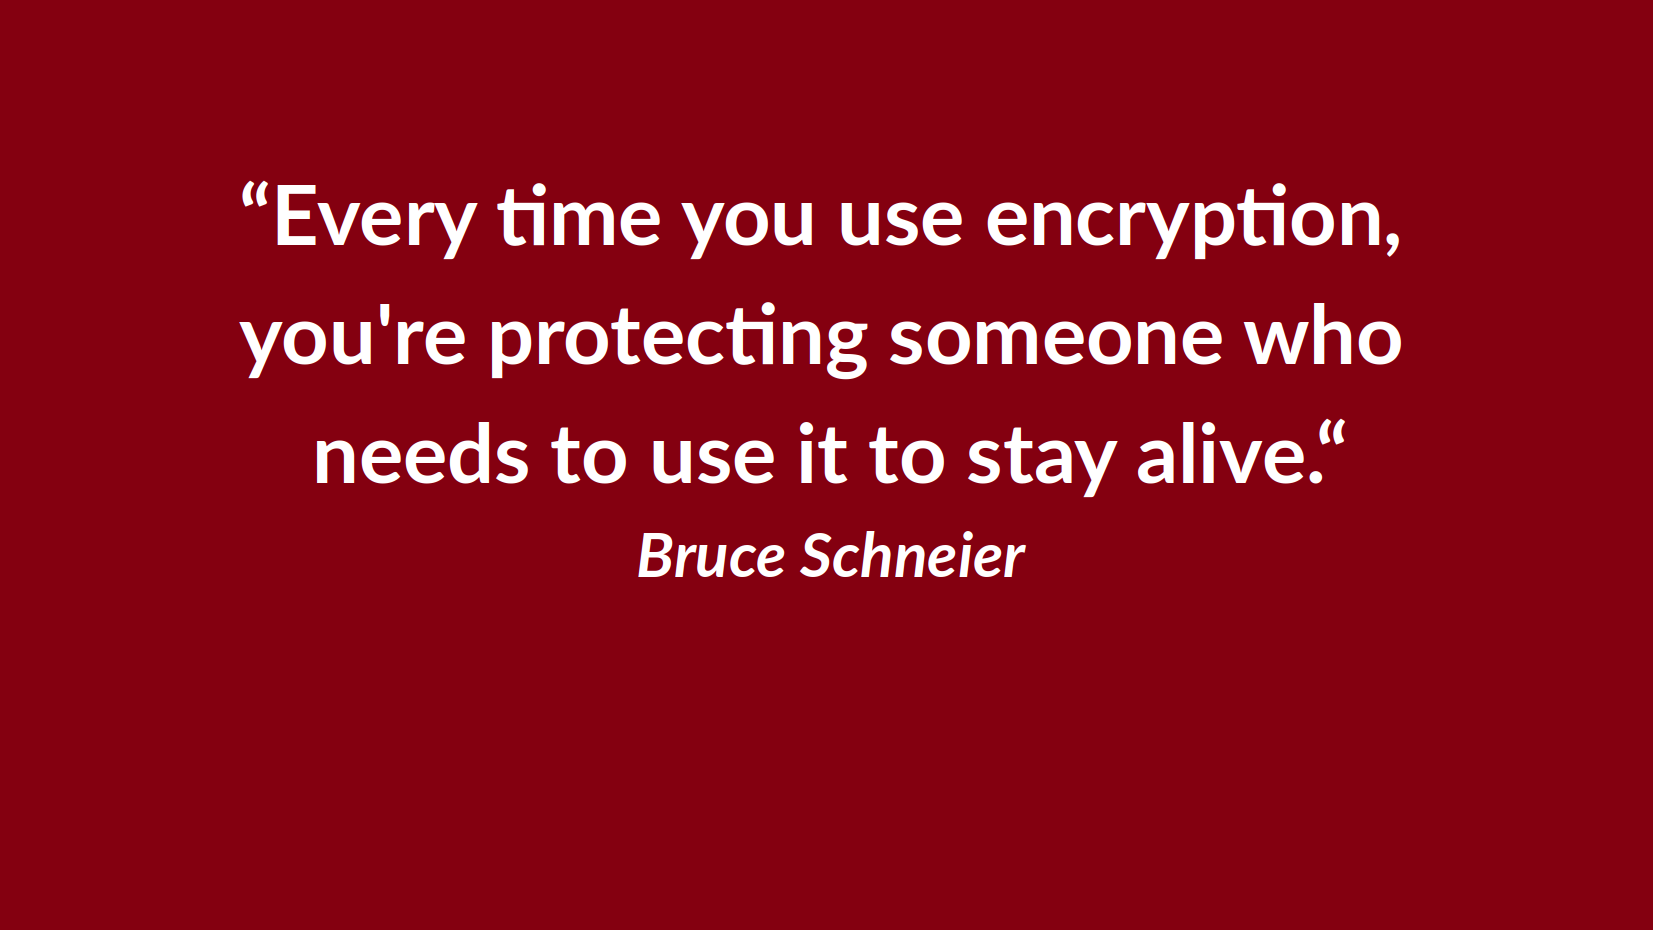 Every time you encrypt an email, you show everyone that privacy matters.